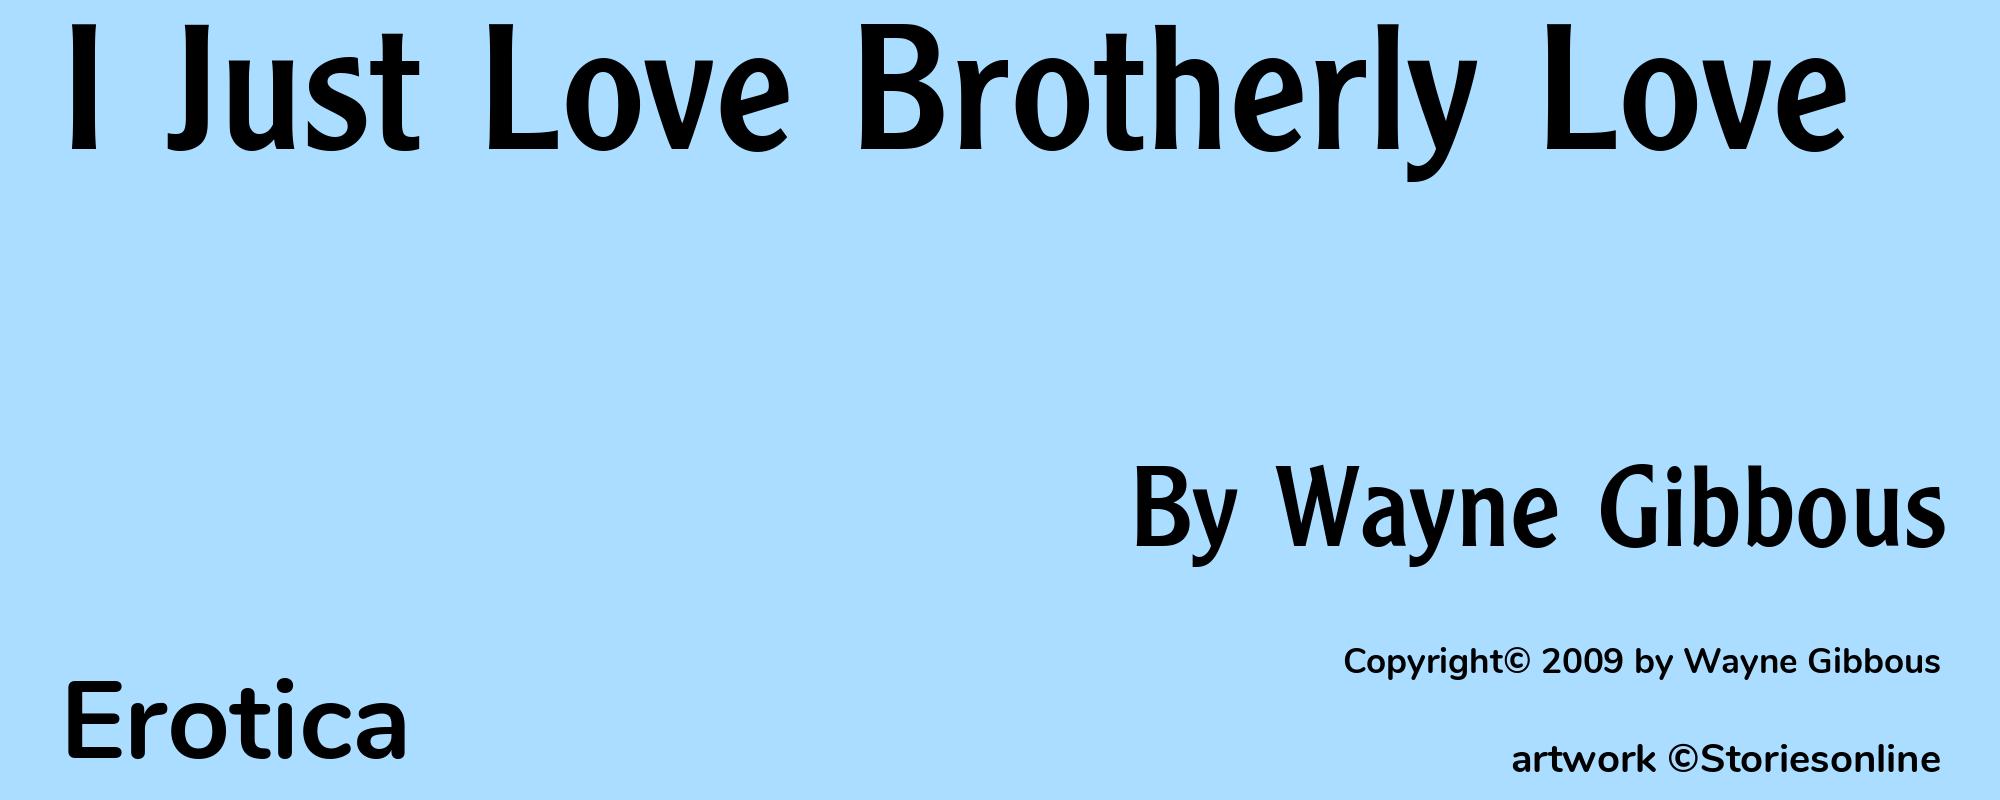 I Just Love Brotherly Love - Cover